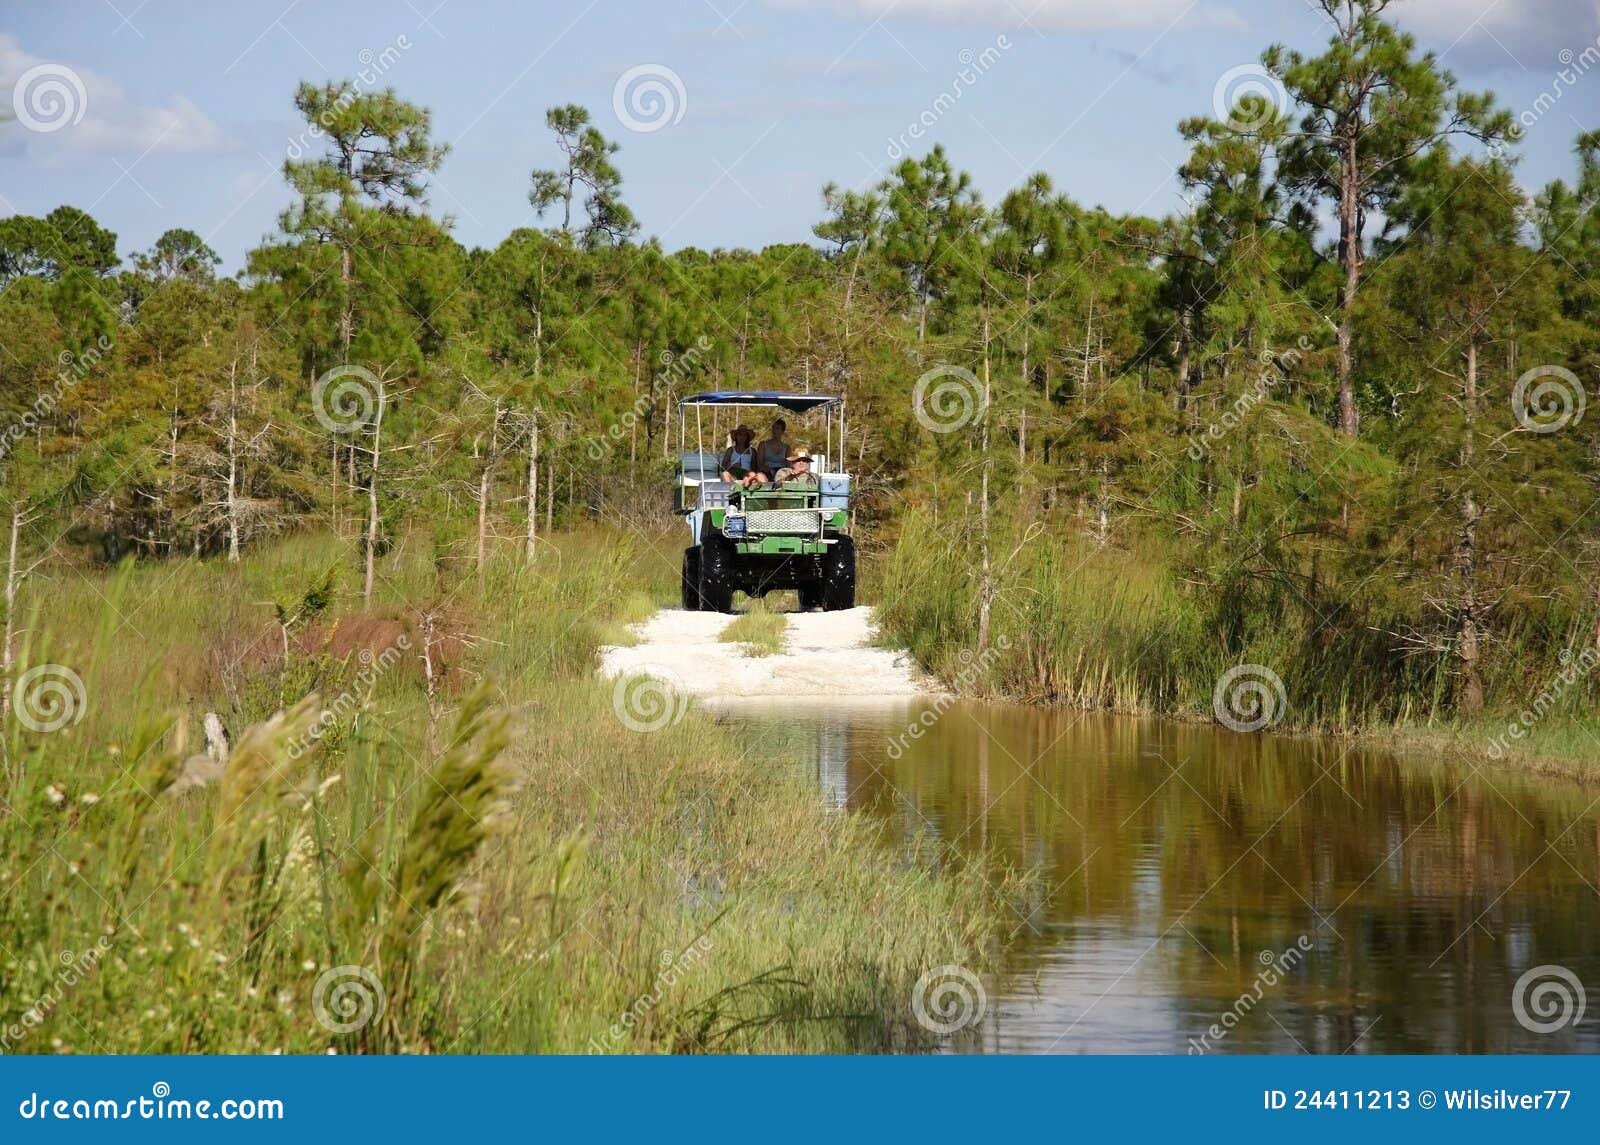 swamp buggy tours near me